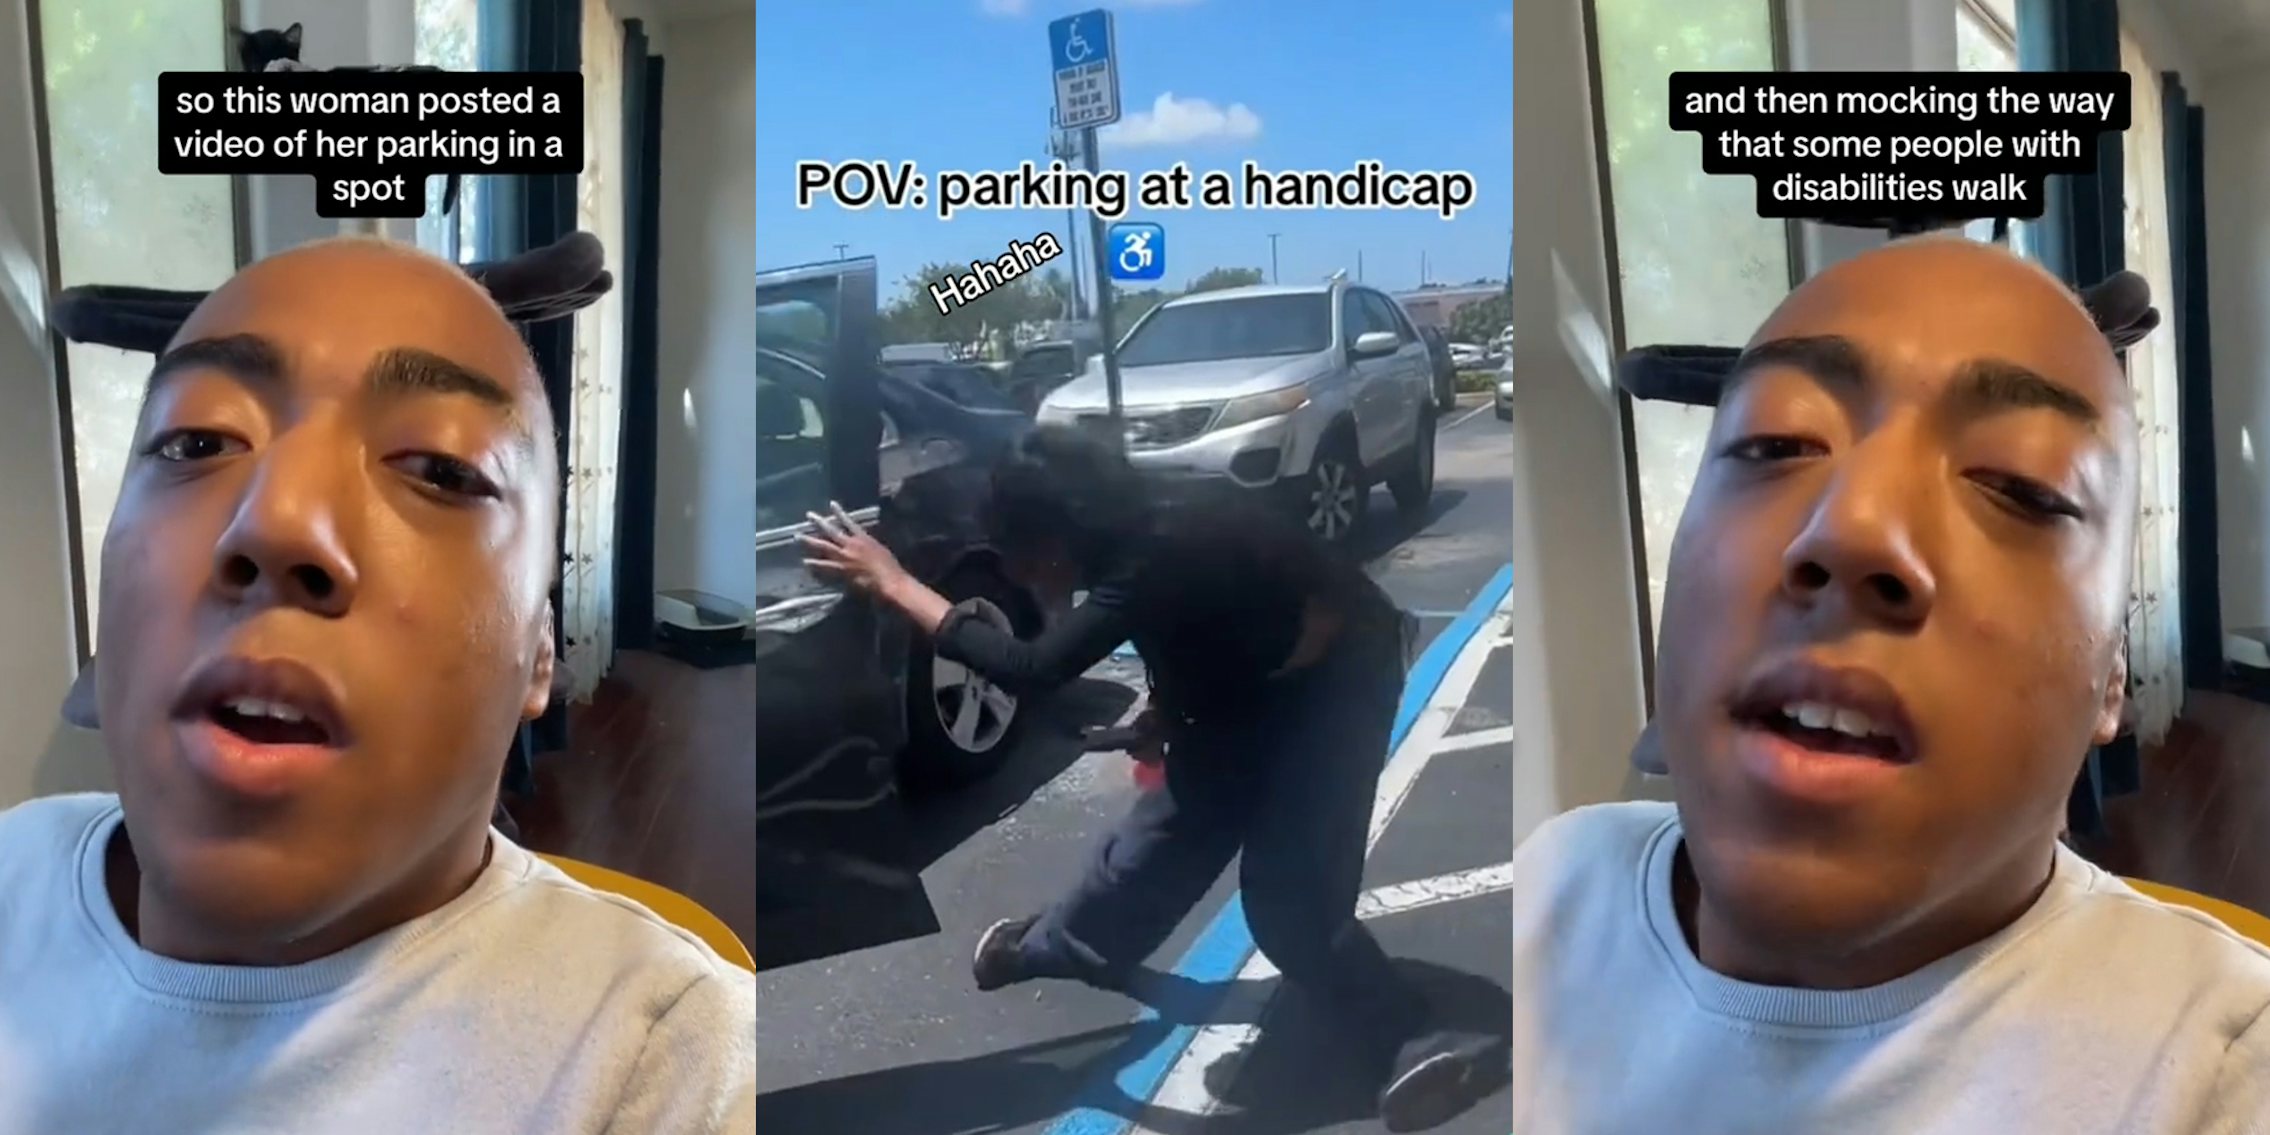 man speaking with caption 'so this woman posted a video of her parking in a spot' (l) woman in handicap parking spot with caption 'POV: parking at a handicap hahaha' (c) man speaking with caption 'and then mocking the way that some people with disabilities walk' (r)